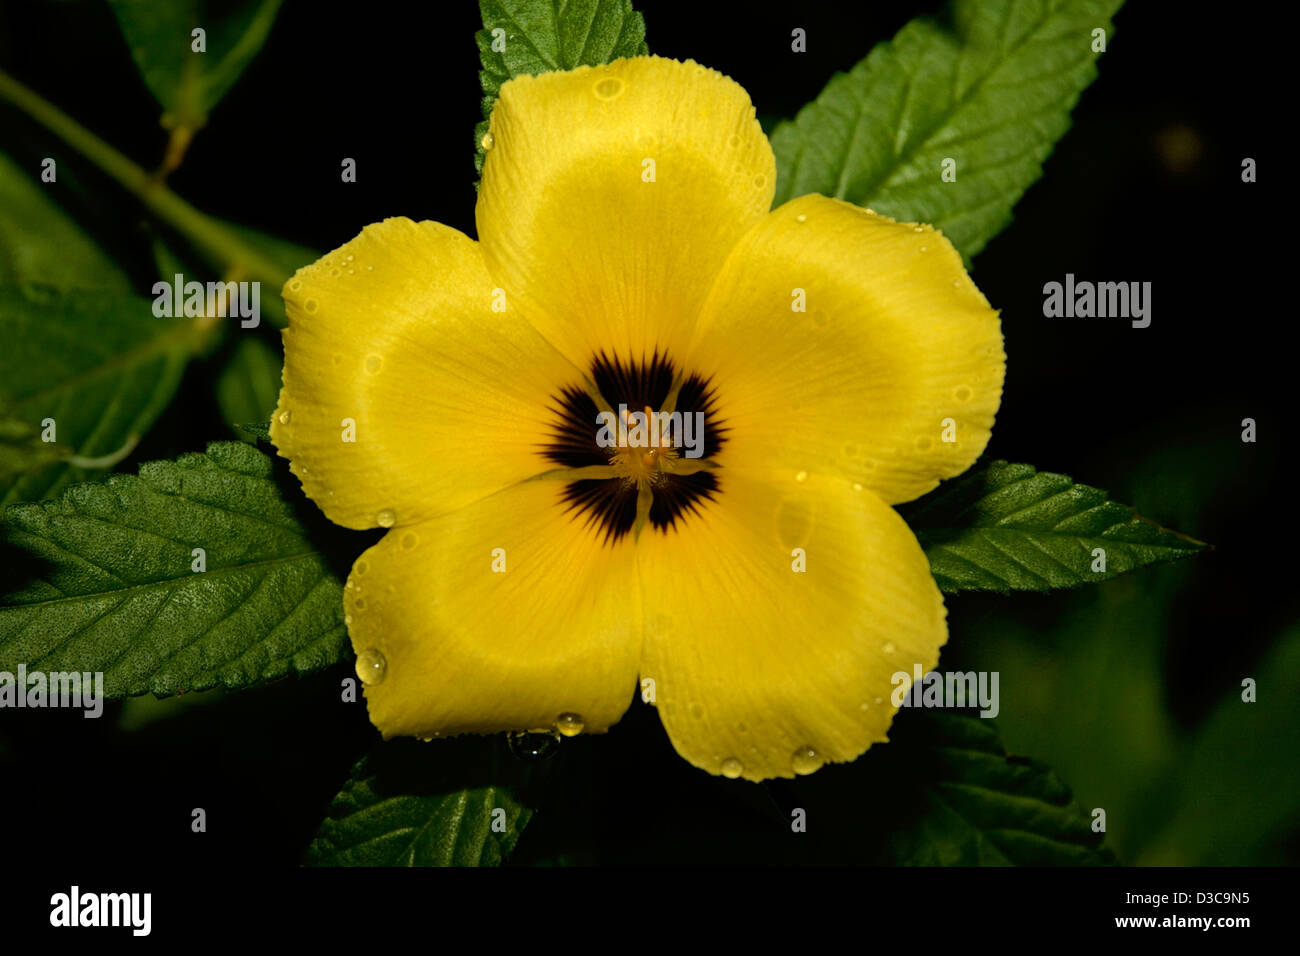 Bright golden yellow flower - with dark centre and raindrops on petals - of Turnera elegans 'Early Bird', with dark green leaves Stock Photo